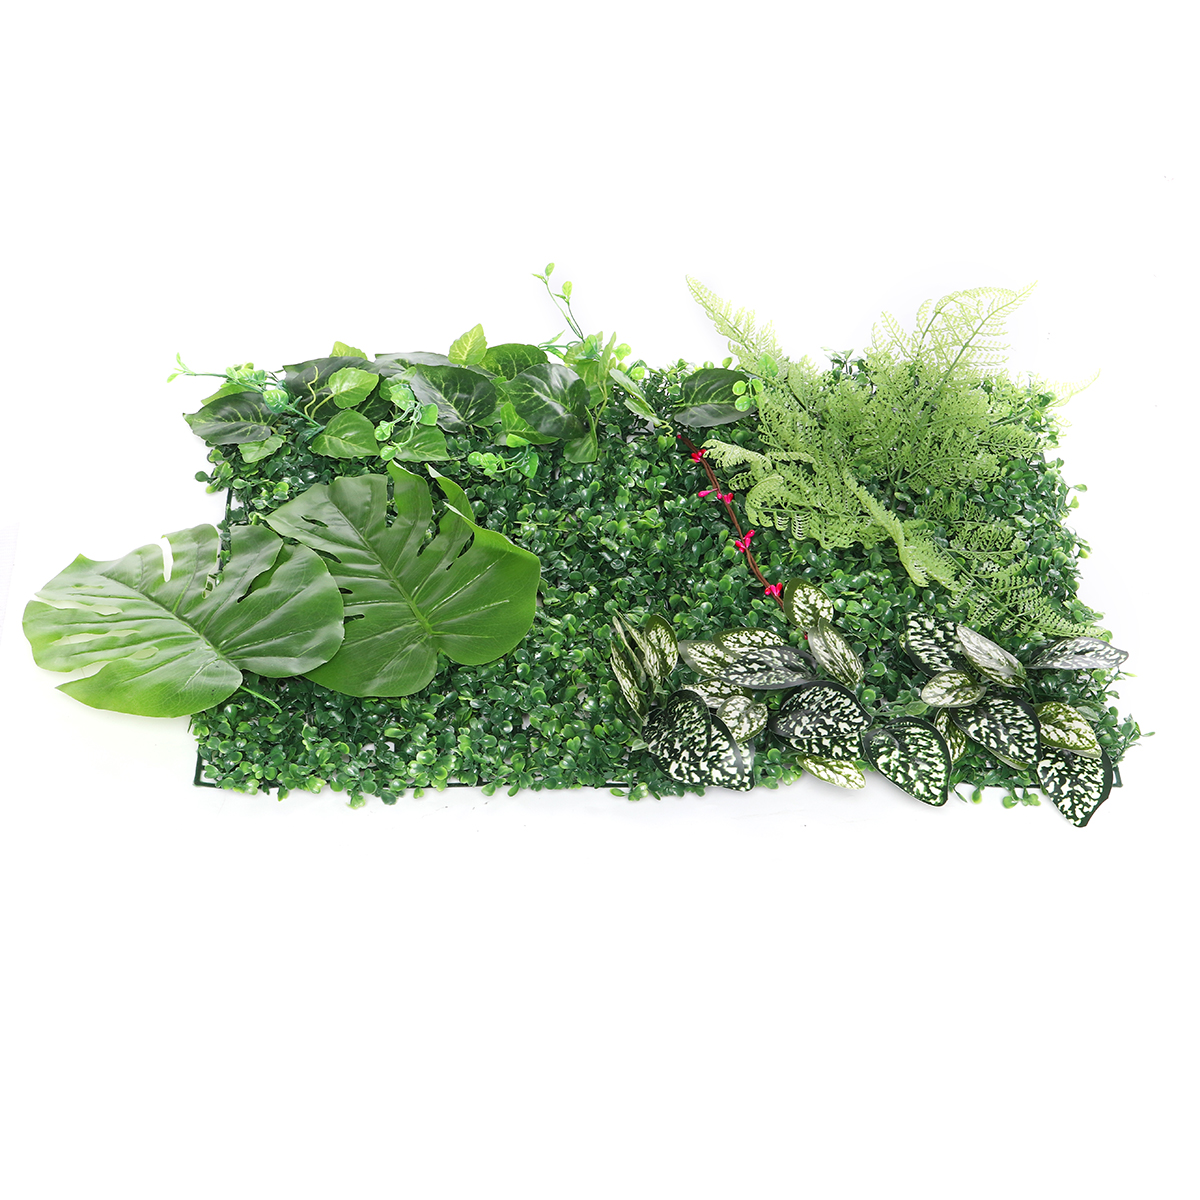 Green-Plant-Wall-Background-Wall-Plastic-Simulation-Plant-Lawn-Wall-1731398-26